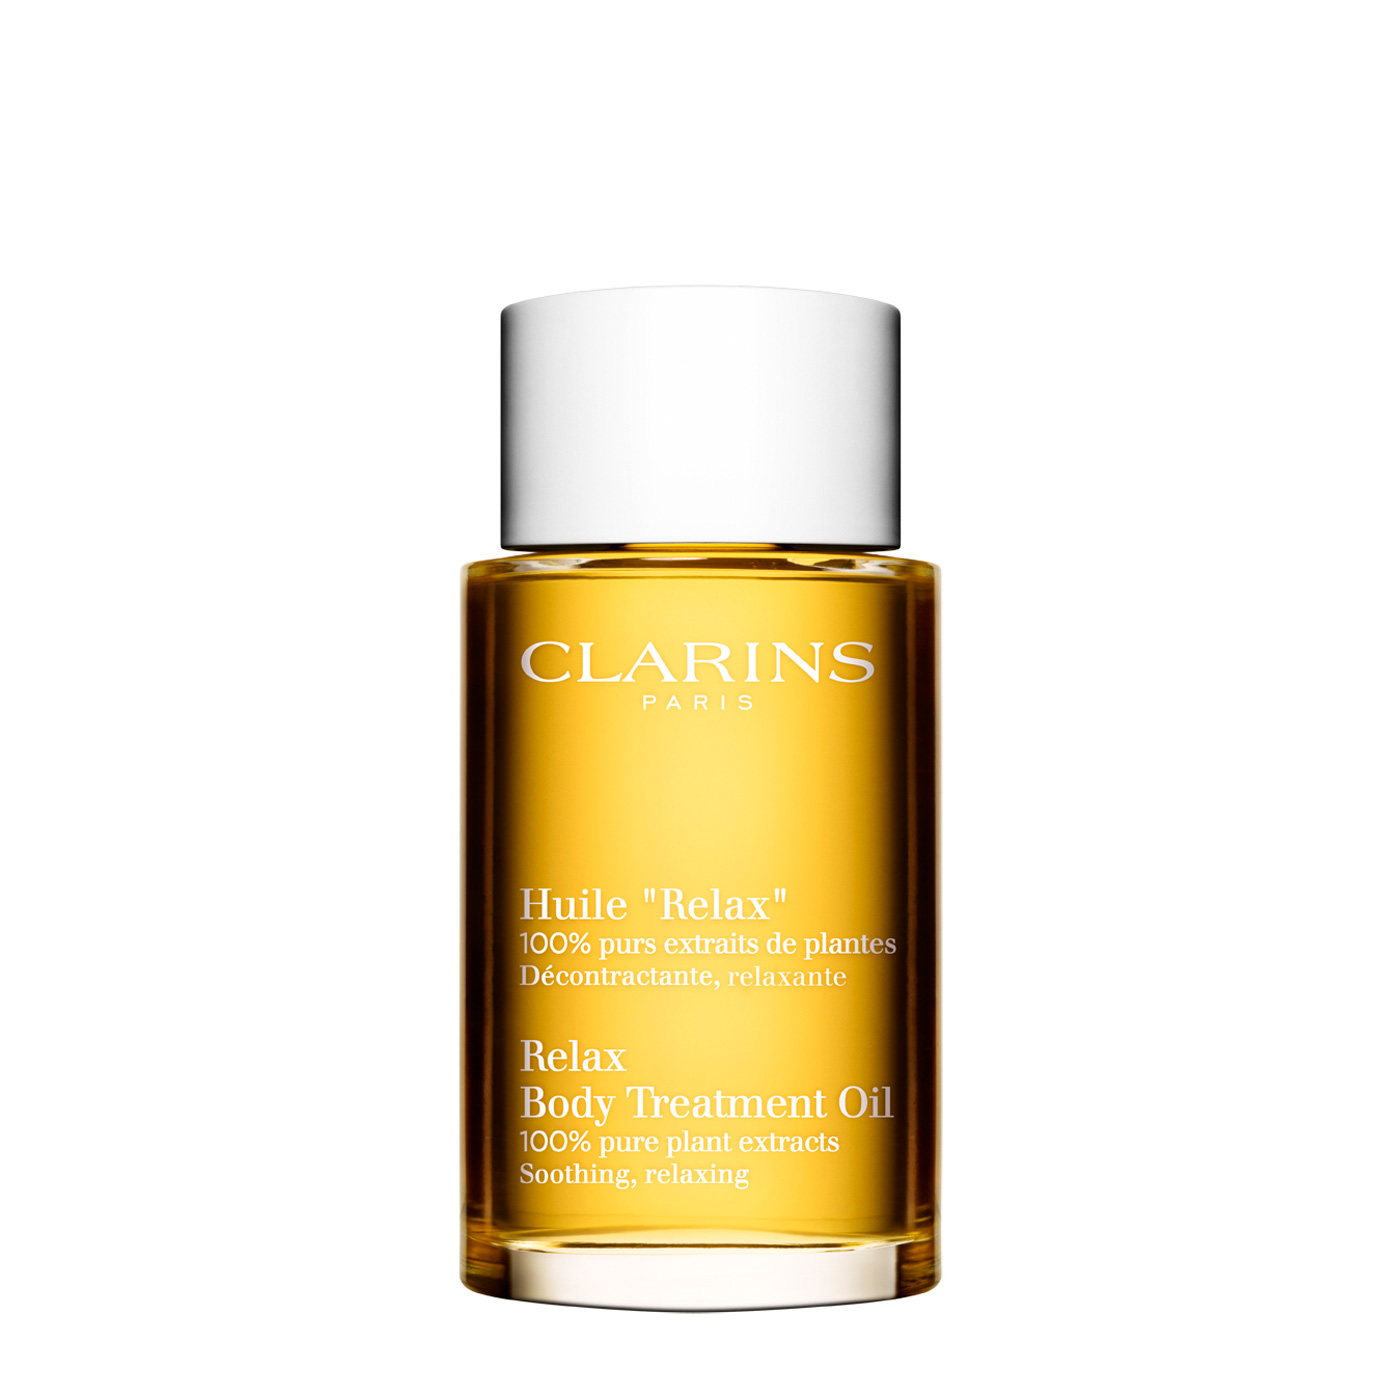 CLARINS HUILE RELAX 100 ML @ 